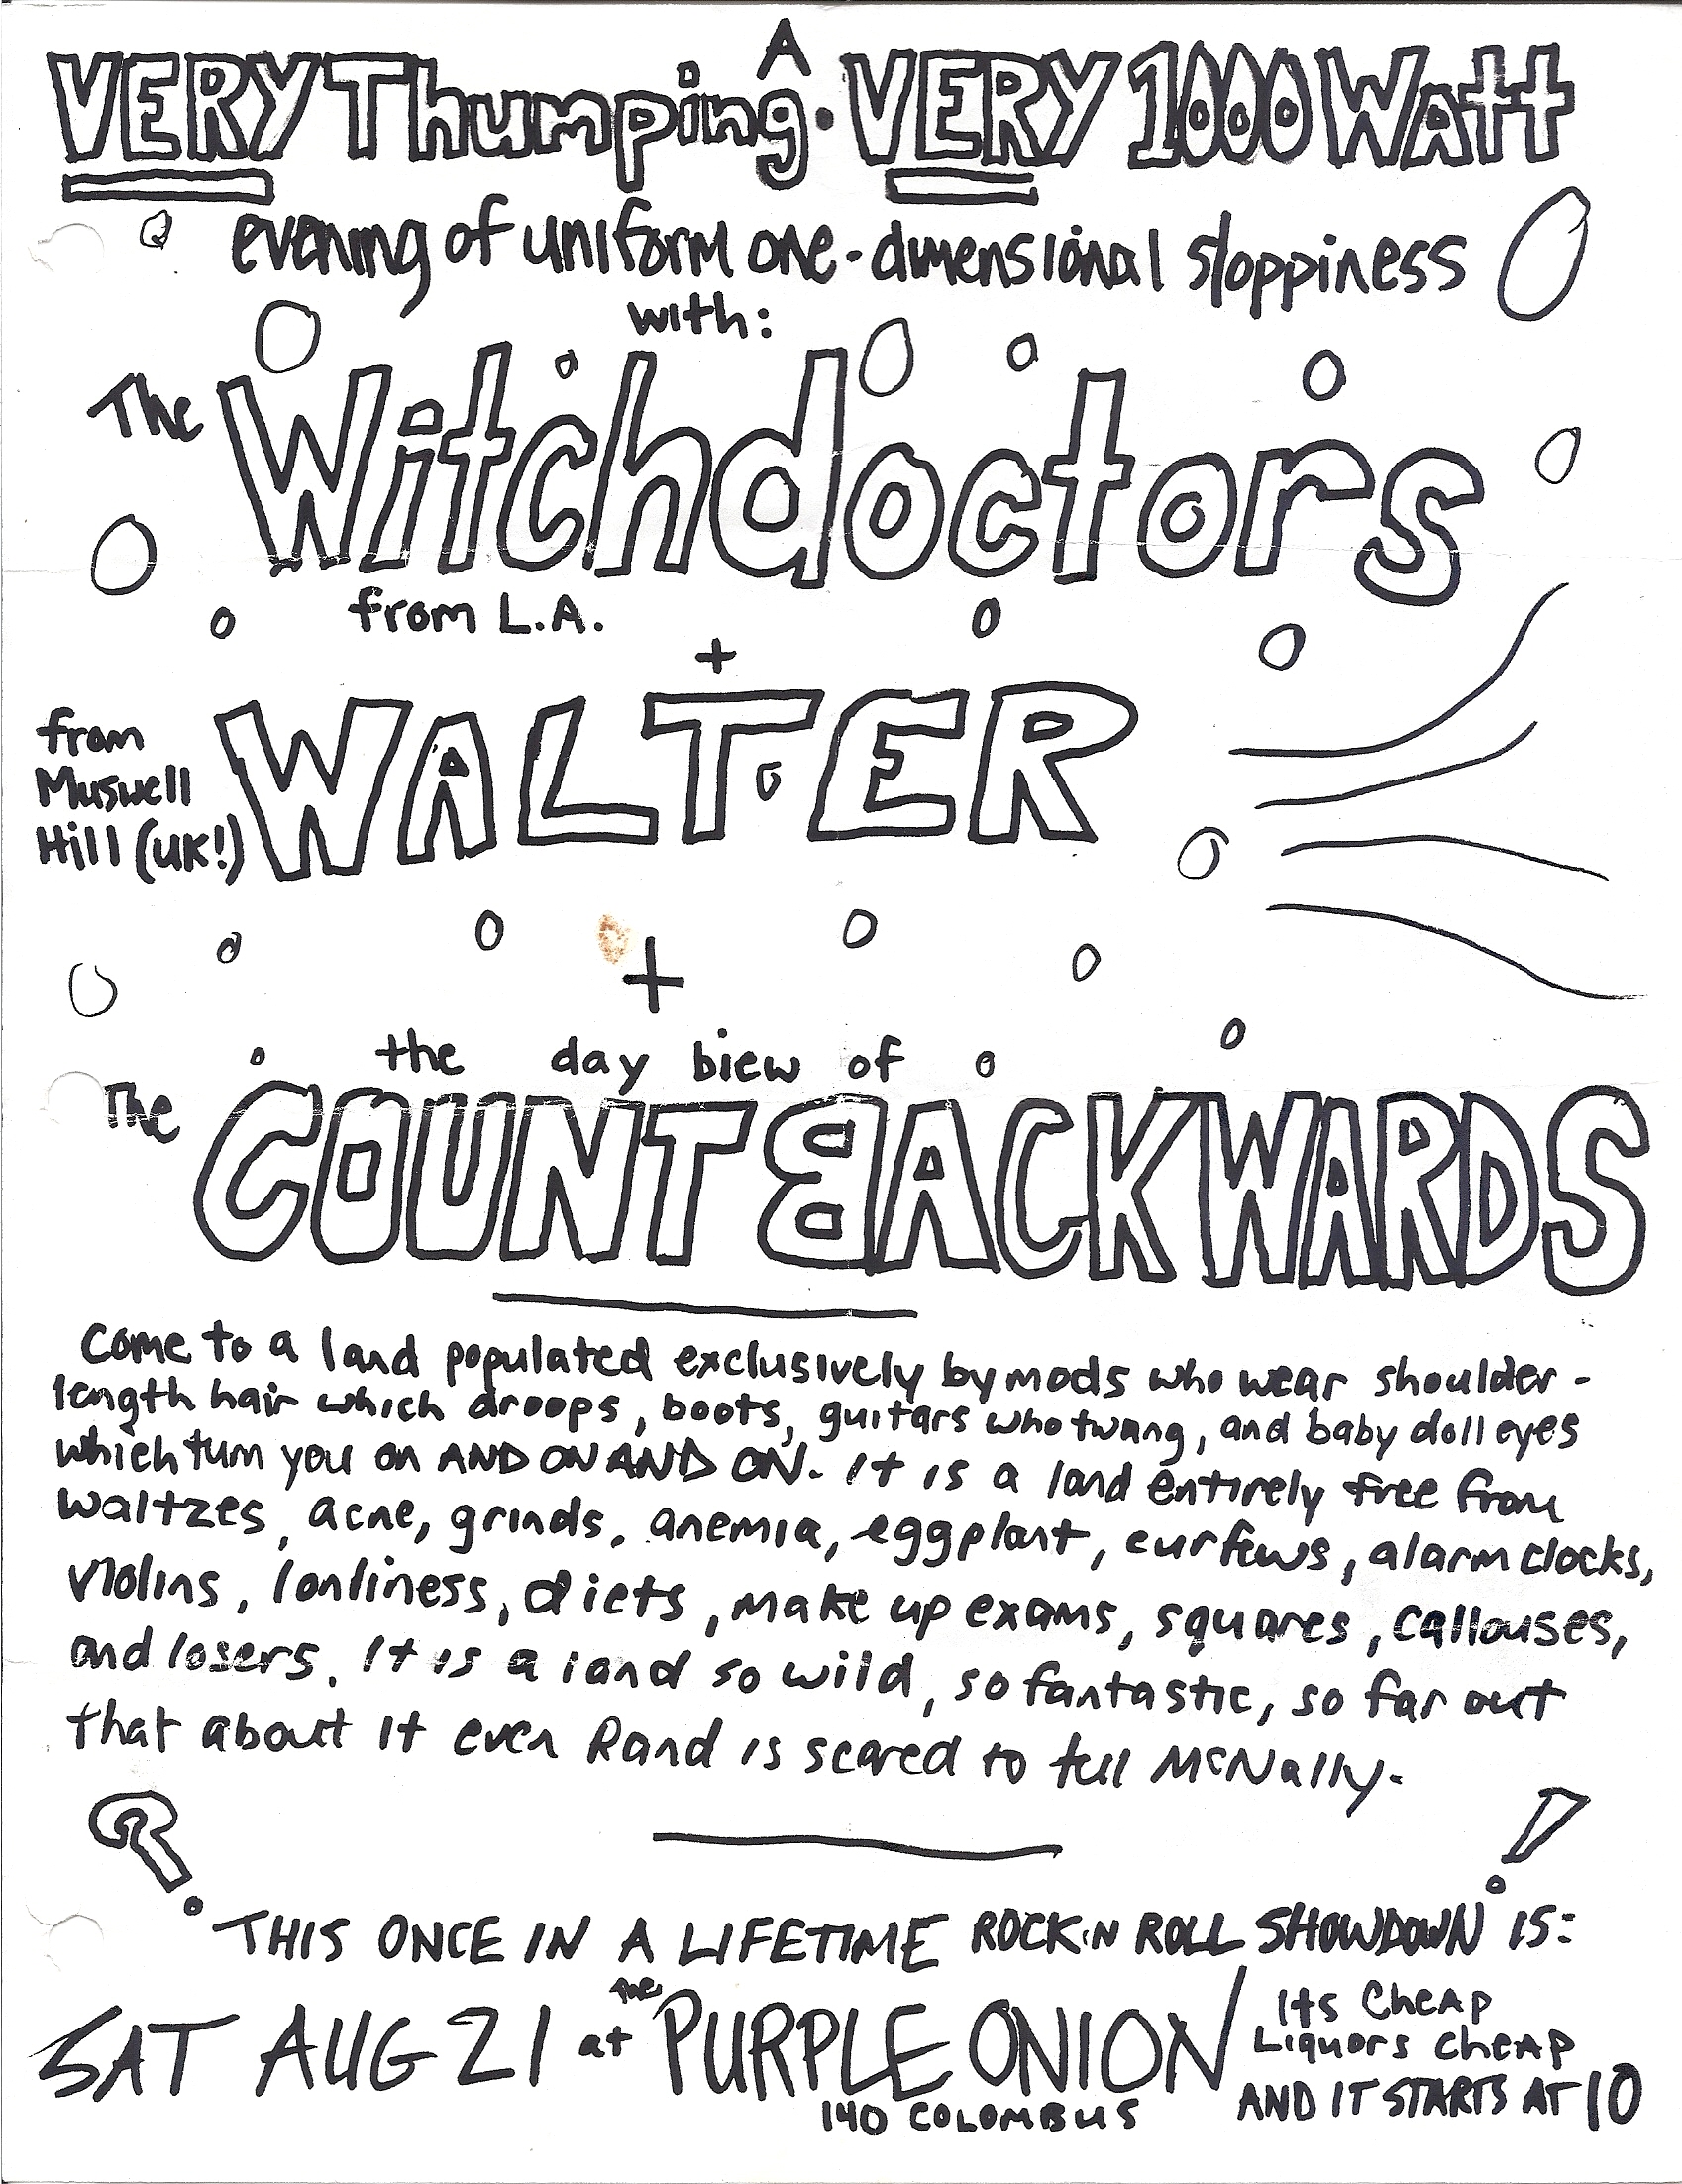 Purple Onion flyer - Count Backwards, The Witchdoctors - Walter